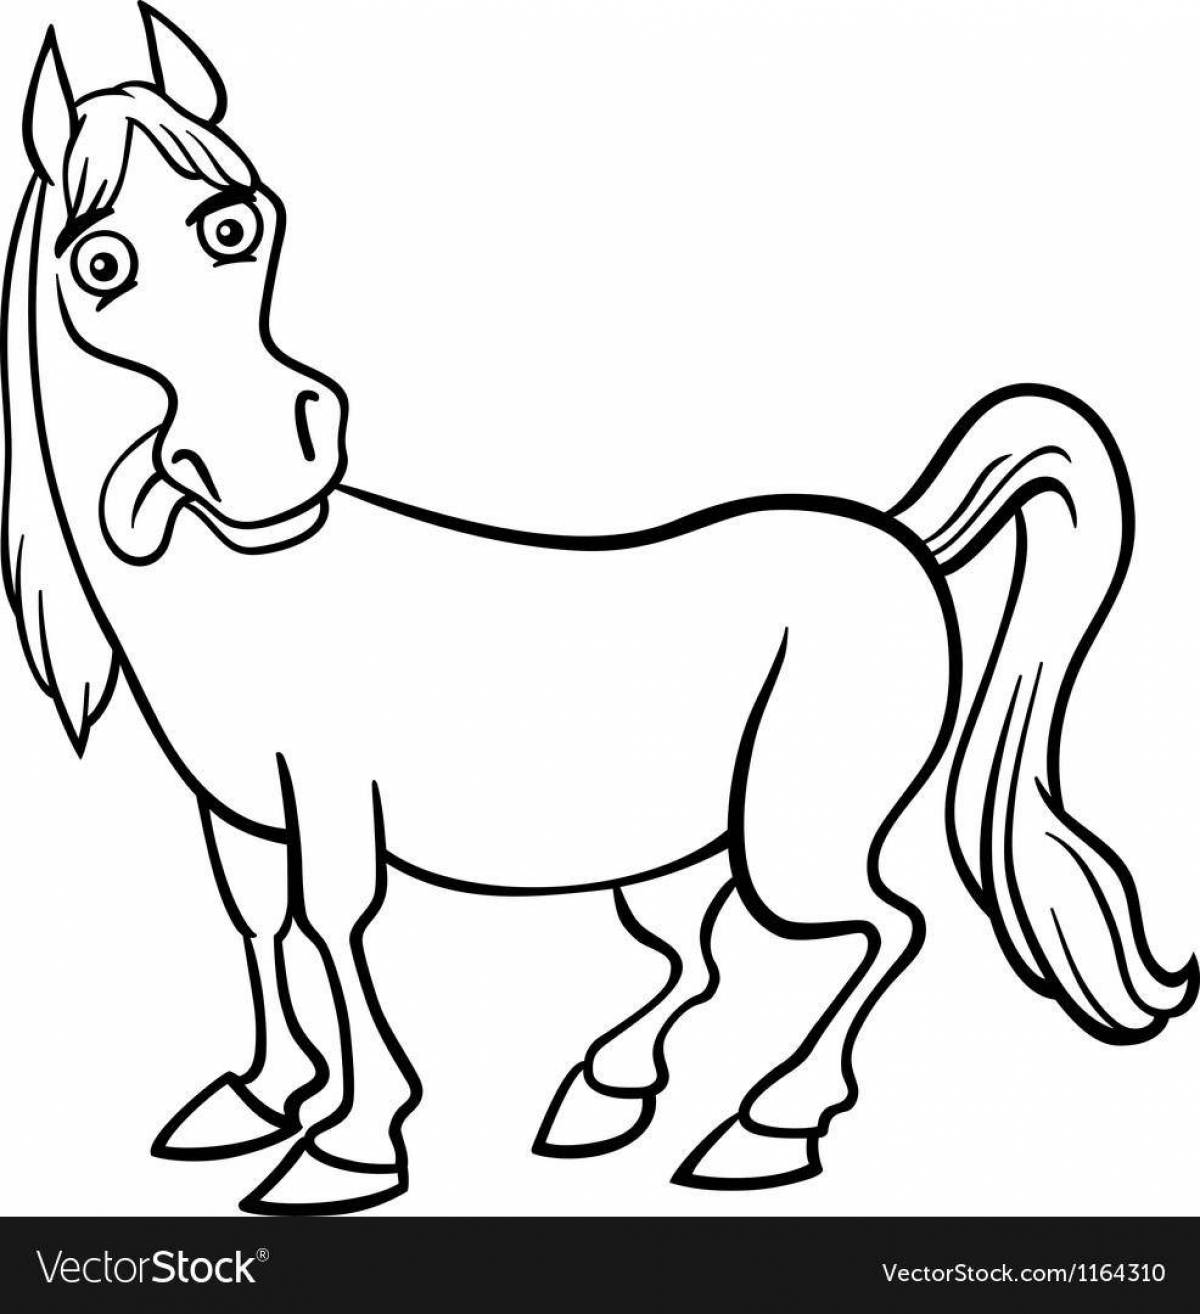 Splendorous coloring page long horse monster